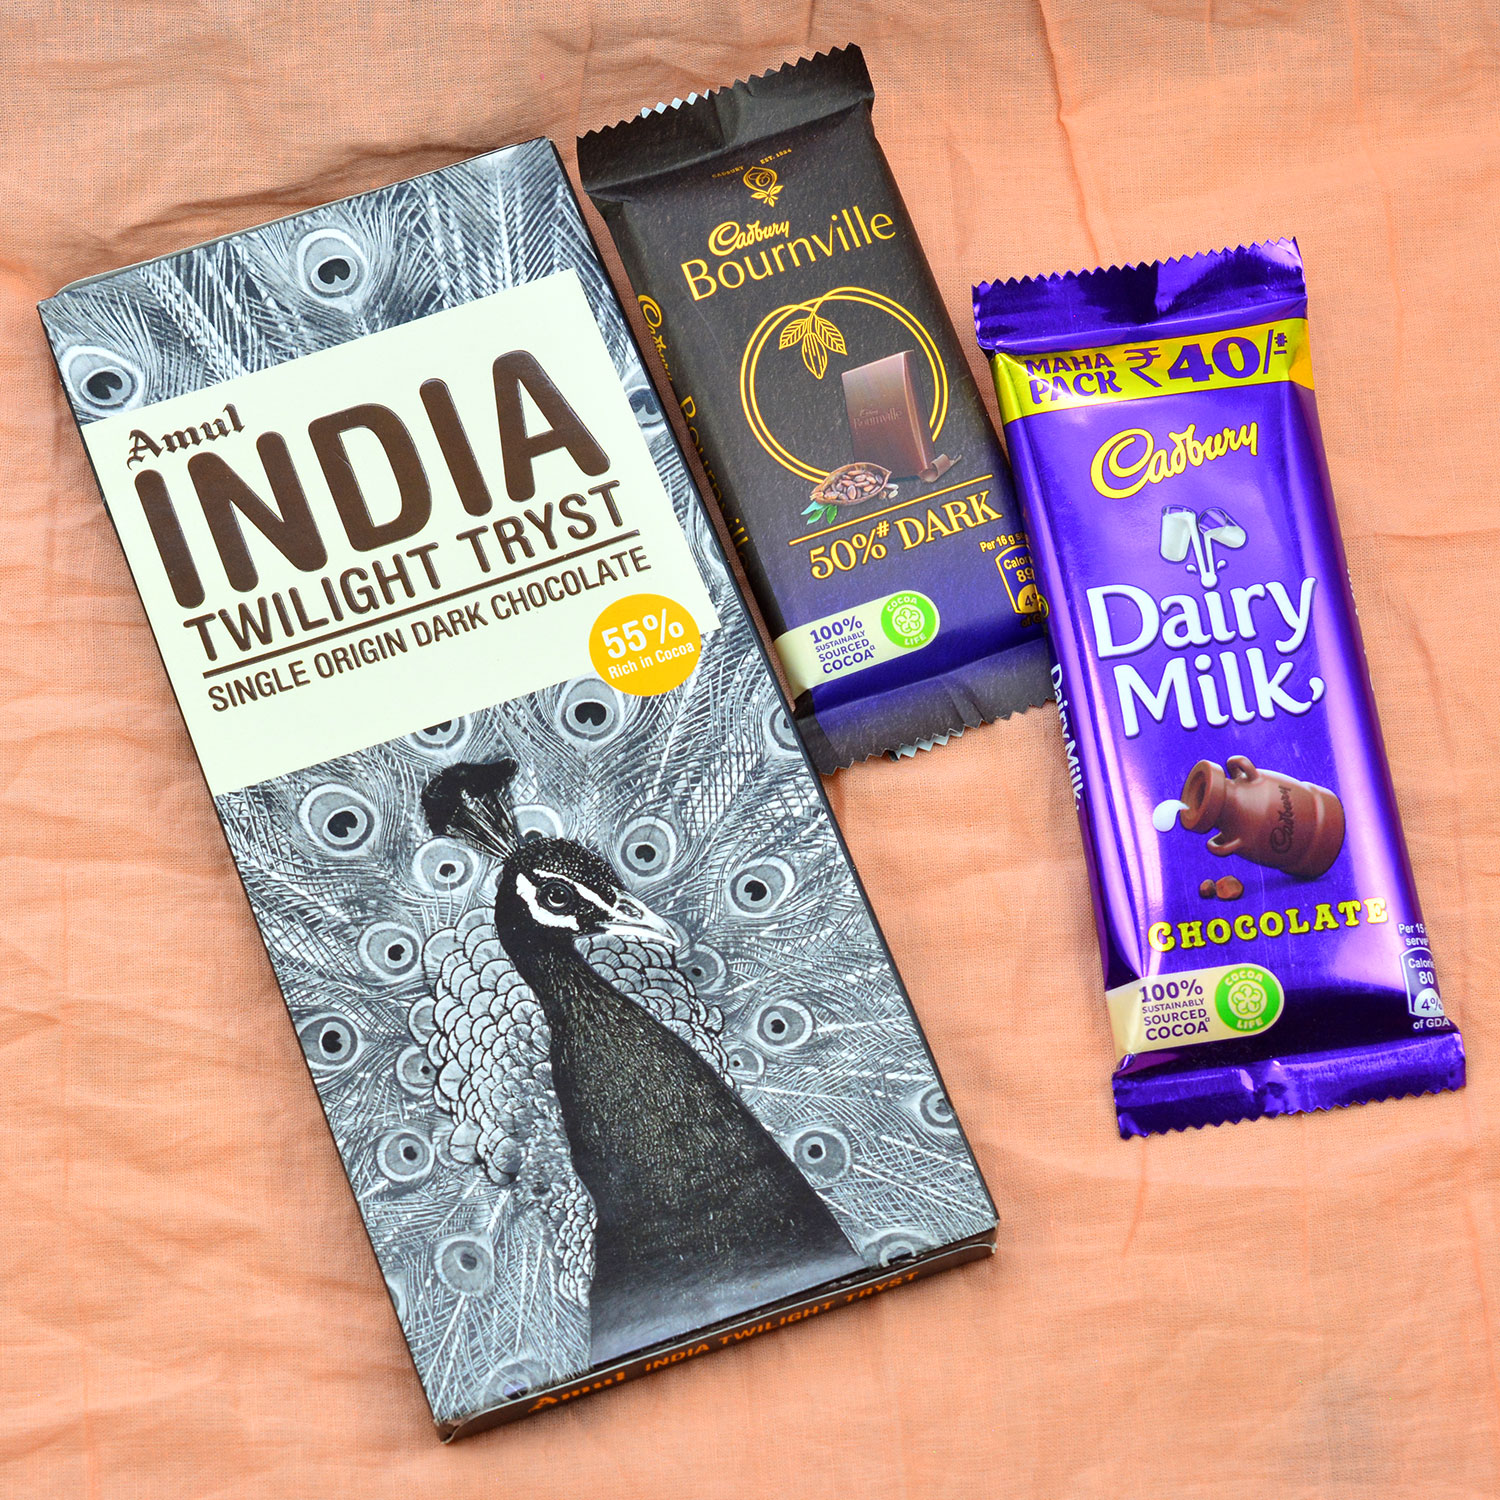 Amul Twilight Tryst with Cadbury Bournville and Small Dairy Milk